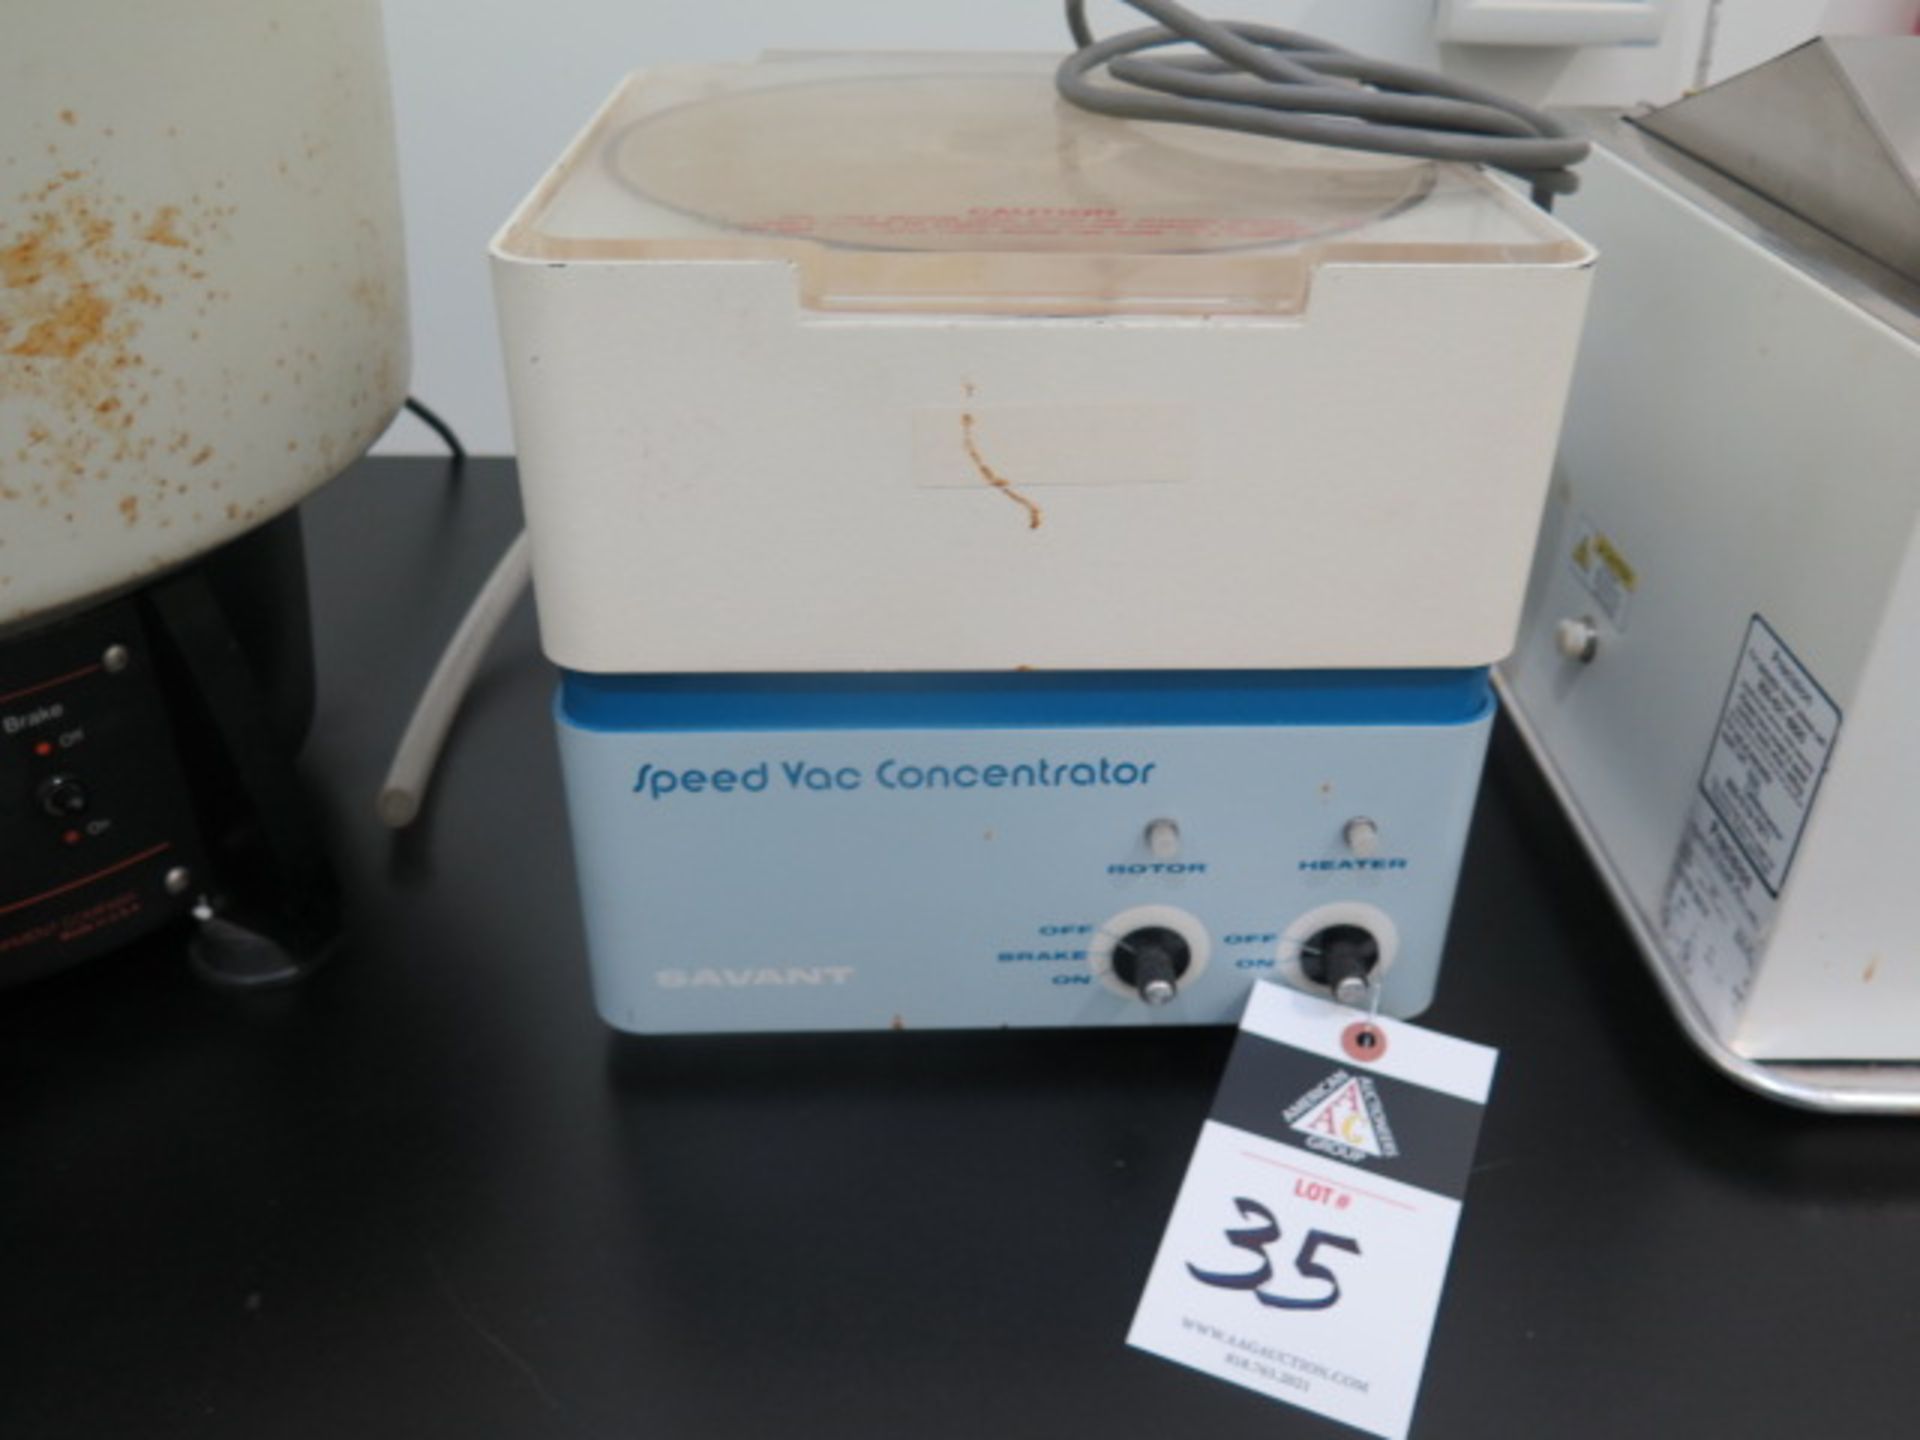 Savant "Speed Vac Concentrator" Vacuum Centrifuge (SOLD AS-IS - NO WARRANTY)